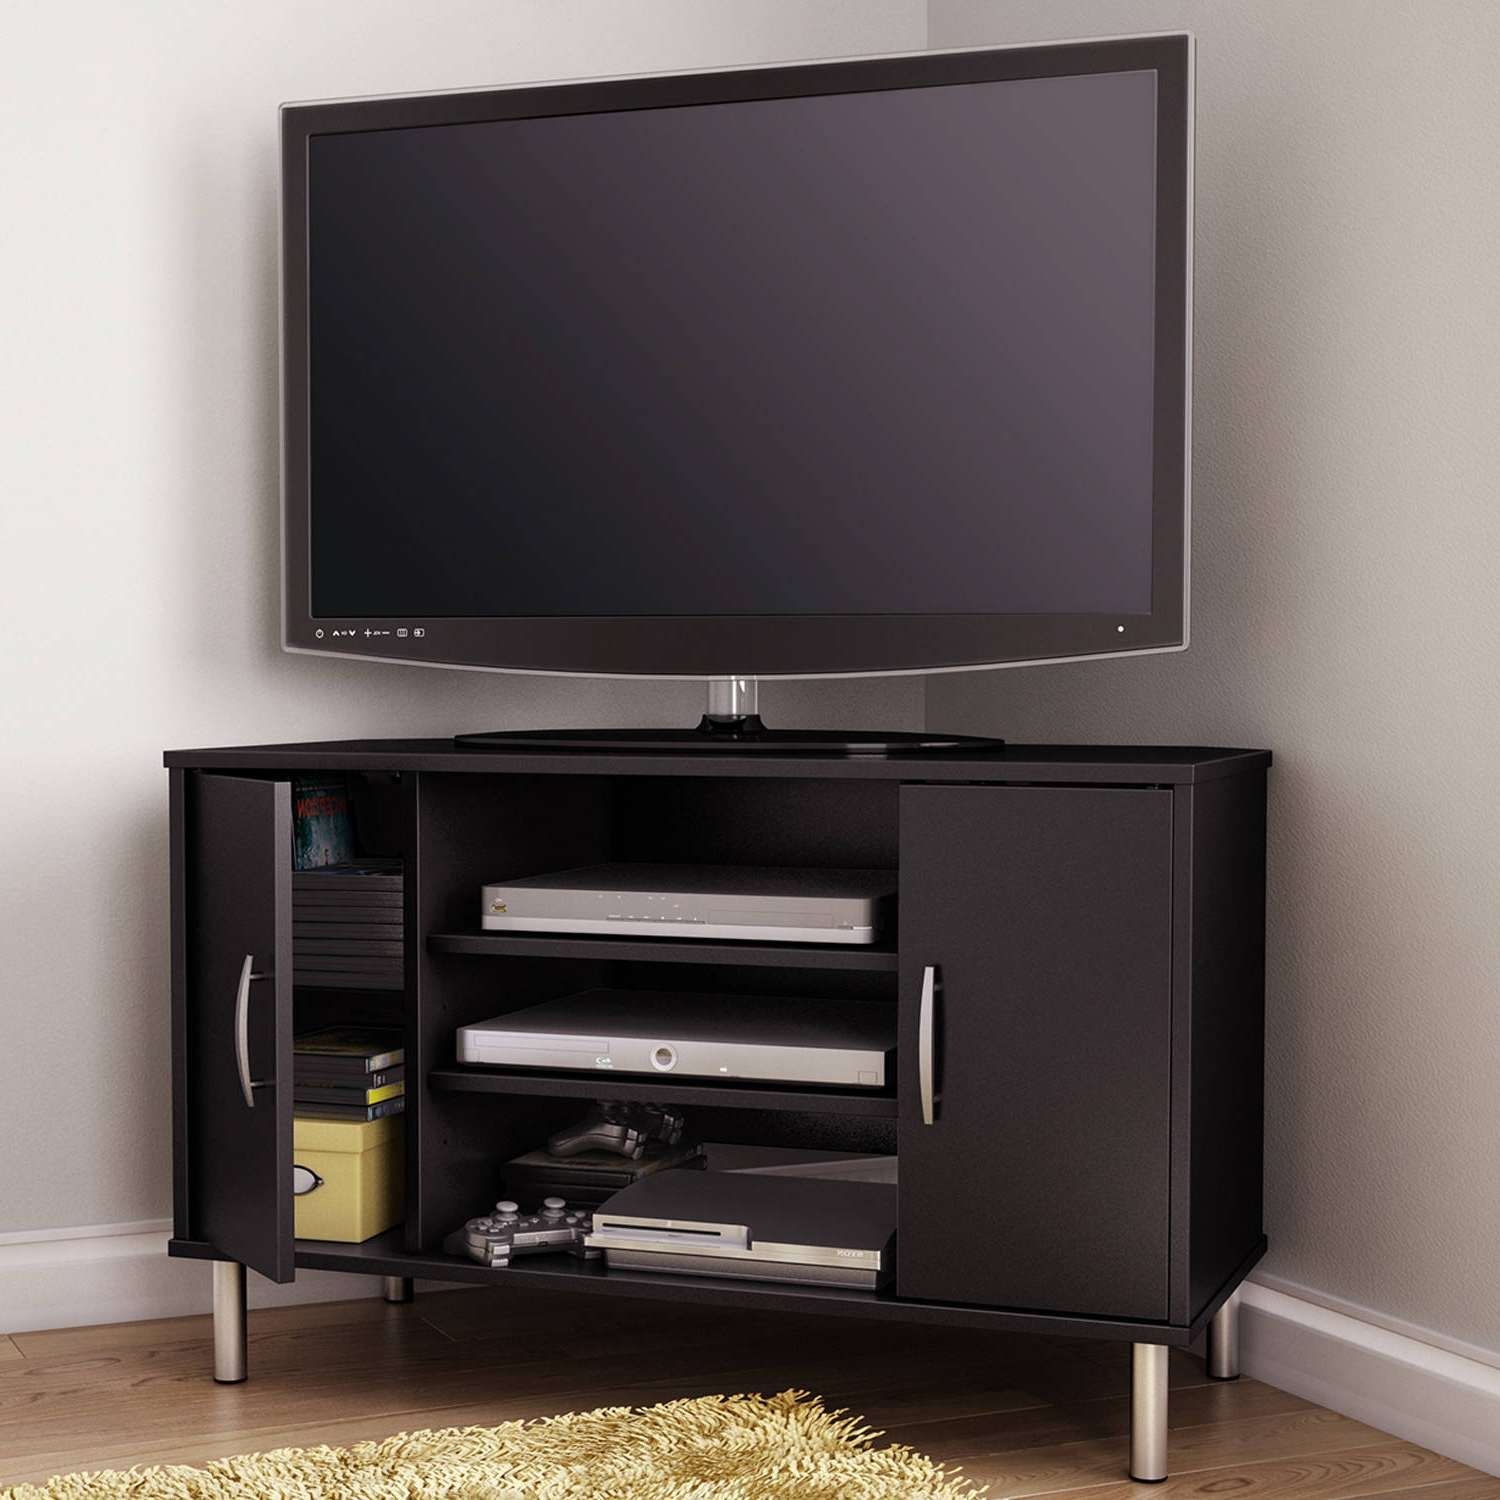 Fancy Tv Stands For 40 Inch Tv 80 In Home Decoration Ideas With Tv Within 40 Inch Corner Tv Stands (Gallery 1 of 15)